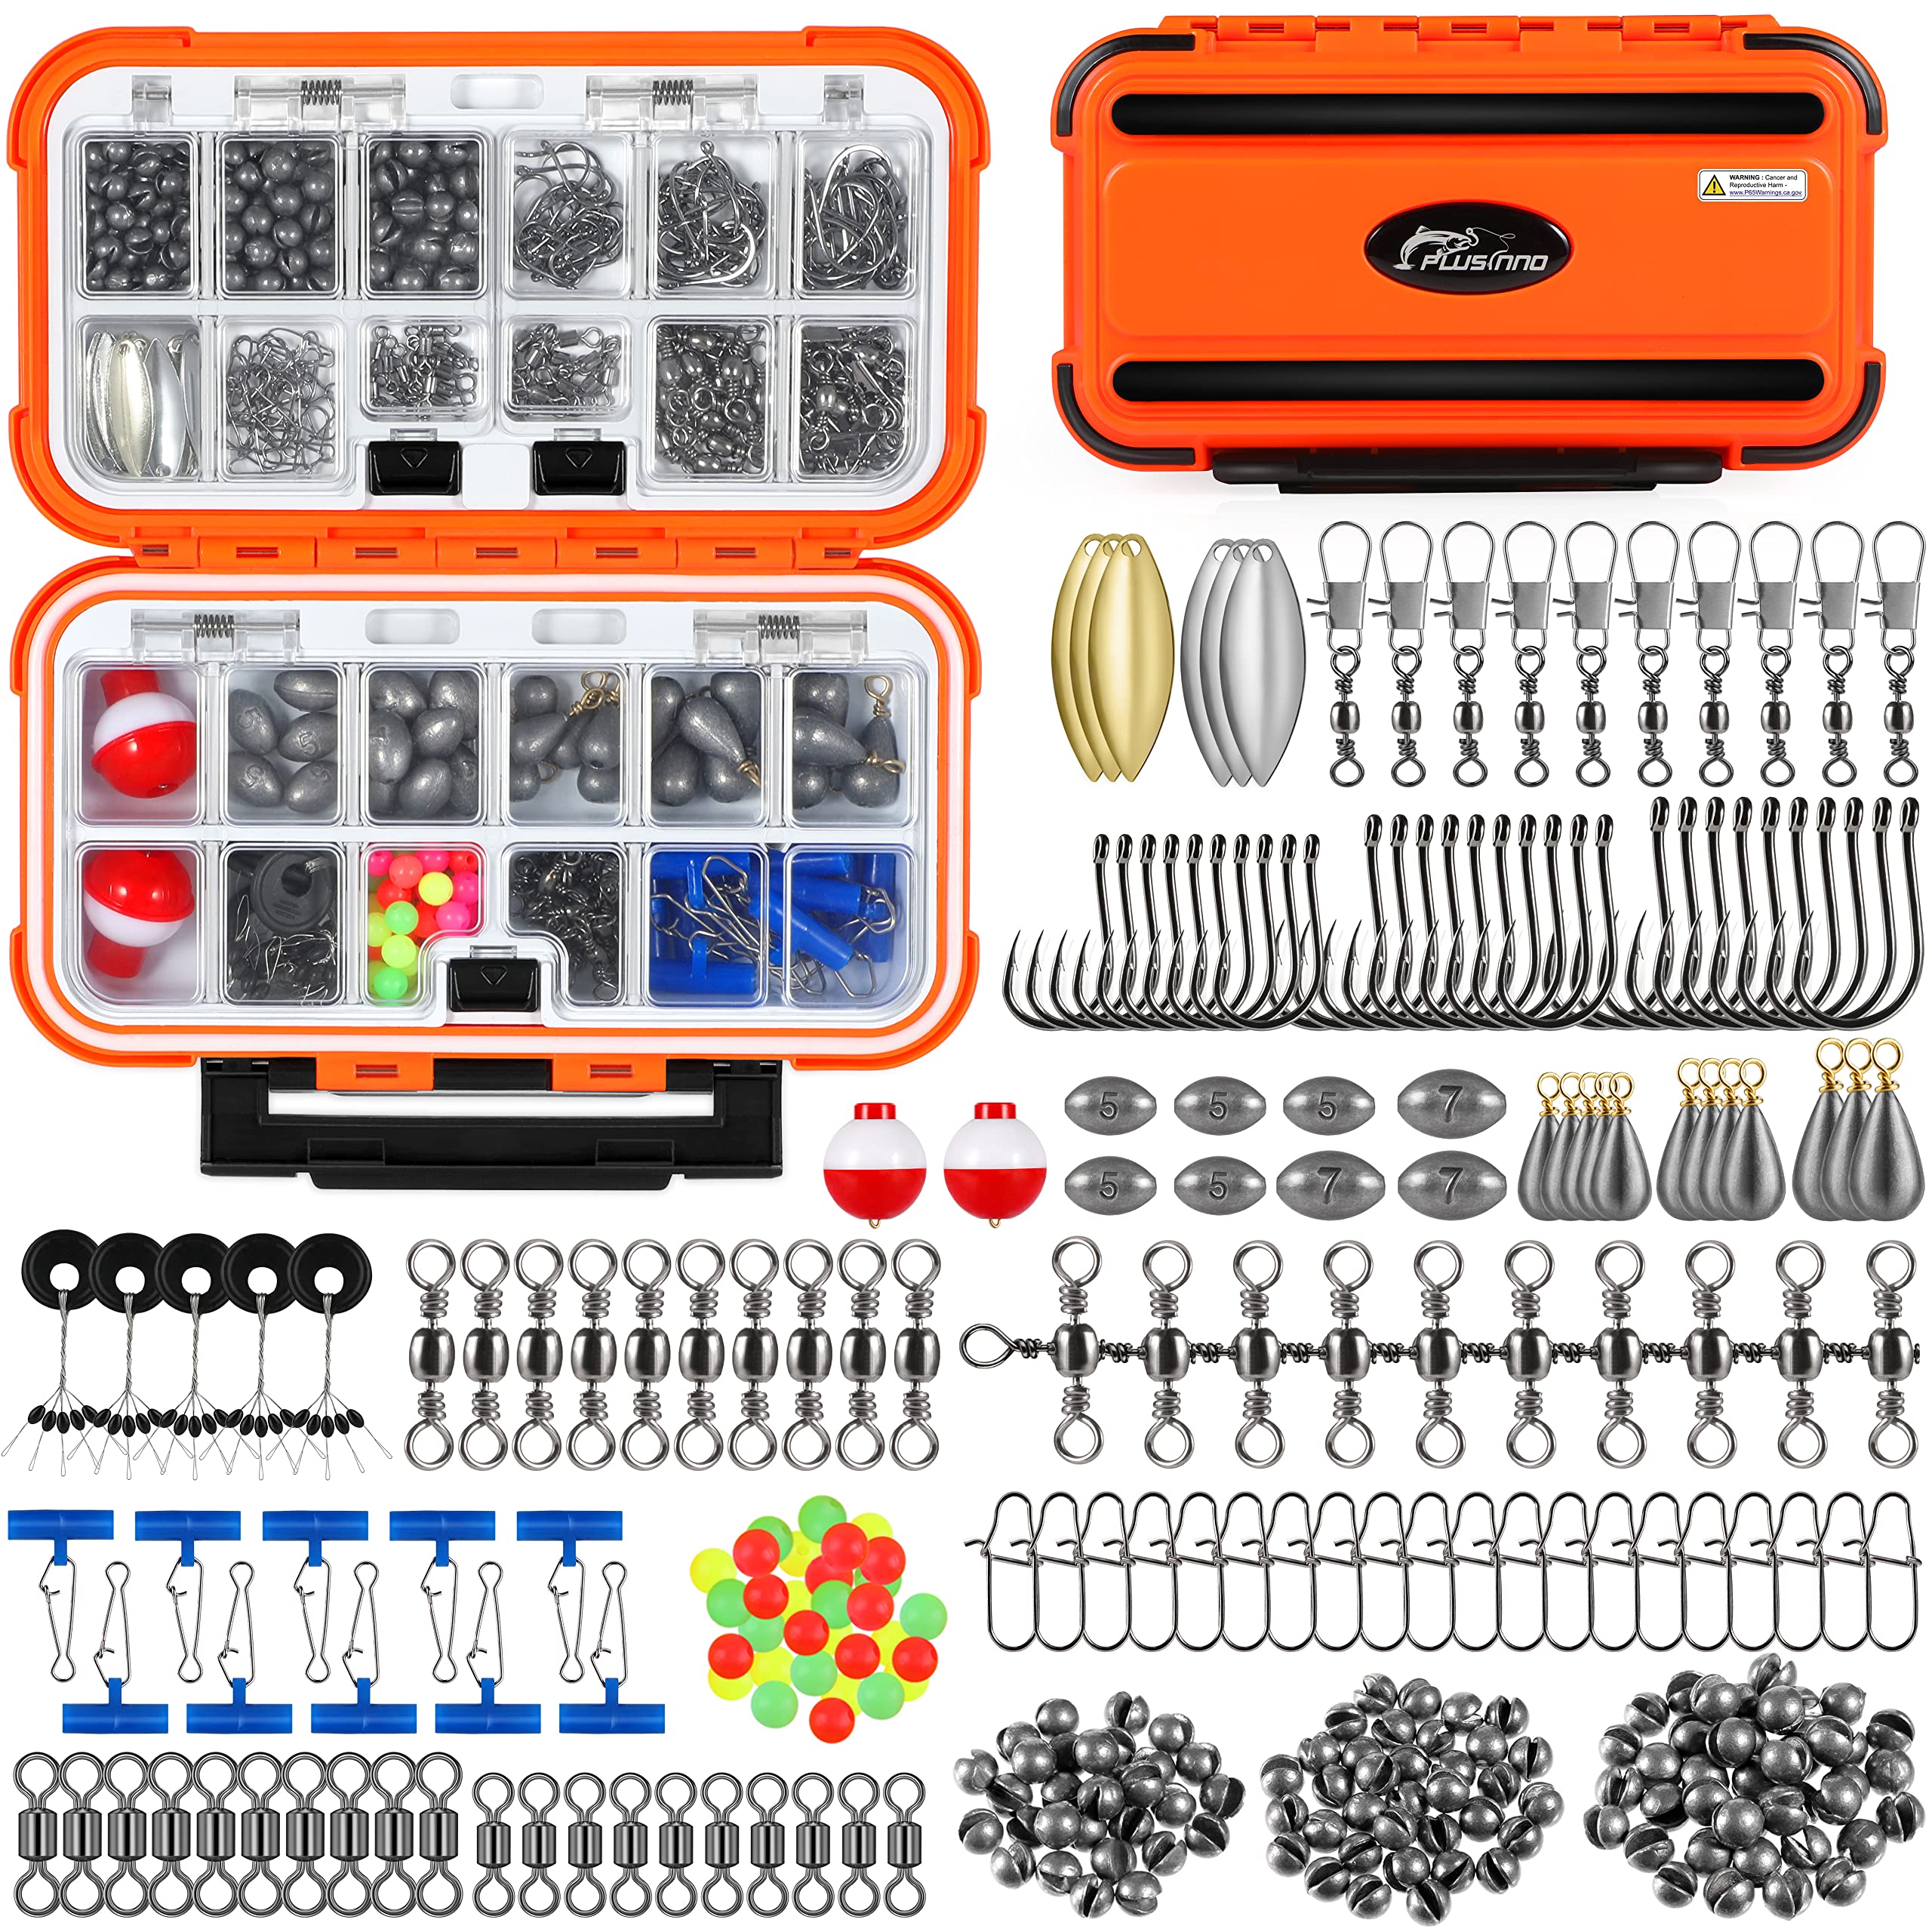 PLUSINNO 253/108pcs Fishing Accessories Kit, Fishing Tackle Box with Tackle  Included, Fishing Lures, Fishing Hooks